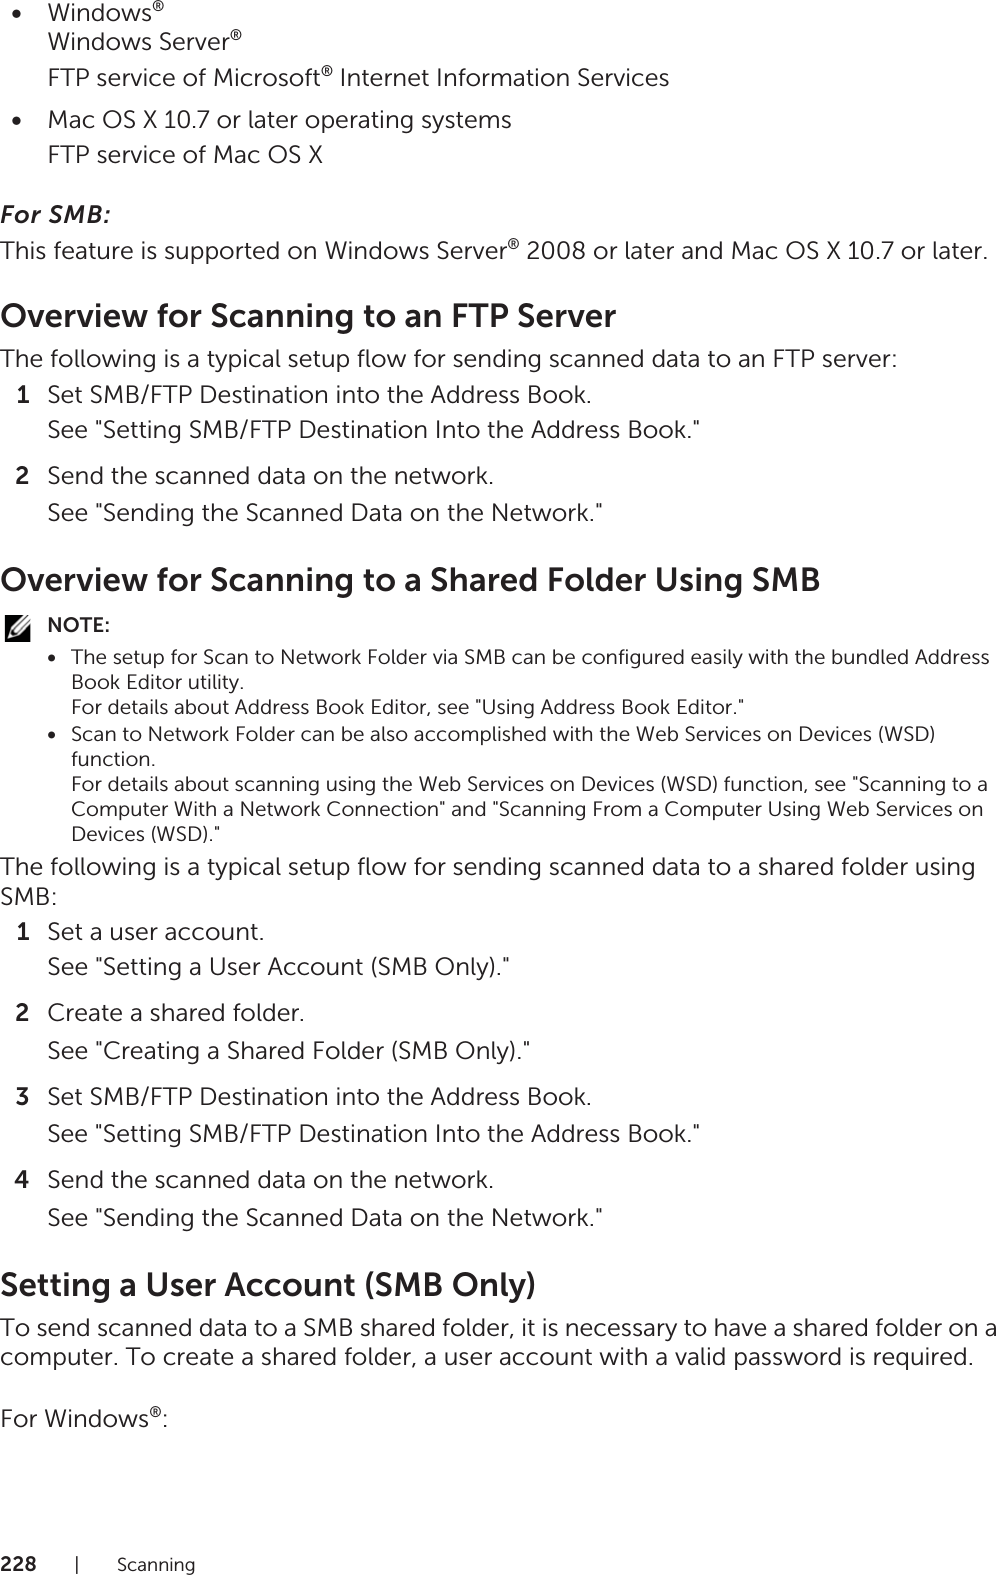 228|Scanning•Windows®Windows Server®FTP service of Microsoft® Internet Information Services•Mac OS X 10.7 or later operating systemsFTP service of Mac OS XFor SMB:This feature is supported on Windows Server® 2008 or later and Mac OS X 10.7 or later.Overview for Scanning to an FTP ServerThe following is a typical setup flow for sending scanned data to an FTP server:1Set SMB/FTP Destination into the Address Book.See &quot;Setting SMB/FTP Destination Into the Address Book.&quot;2Send the scanned data on the network.See &quot;Sending the Scanned Data on the Network.&quot;Overview for Scanning to a Shared Folder Using SMBNOTE:•The setup for Scan to Network Folder via SMB can be configured easily with the bundled Address Book Editor utility.For details about Address Book Editor, see &quot;Using Address Book Editor.&quot;•Scan to Network Folder can be also accomplished with the Web Services on Devices (WSD) function. For details about scanning using the Web Services on Devices (WSD) function, see &quot;Scanning to a Computer With a Network Connection&quot; and &quot;Scanning From a Computer Using Web Services on Devices (WSD).&quot;The following is a typical setup flow for sending scanned data to a shared folder using SMB:1Set a user account.See &quot;Setting a User Account (SMB Only).&quot;2Create a shared folder.See &quot;Creating a Shared Folder (SMB Only).&quot;3Set SMB/FTP Destination into the Address Book.See &quot;Setting SMB/FTP Destination Into the Address Book.&quot;4Send the scanned data on the network.See &quot;Sending the Scanned Data on the Network.&quot;Setting a User Account (SMB Only)To send scanned data to a SMB shared folder, it is necessary to have a shared folder on a computer. To create a shared folder, a user account with a valid password is required.For Windows®: